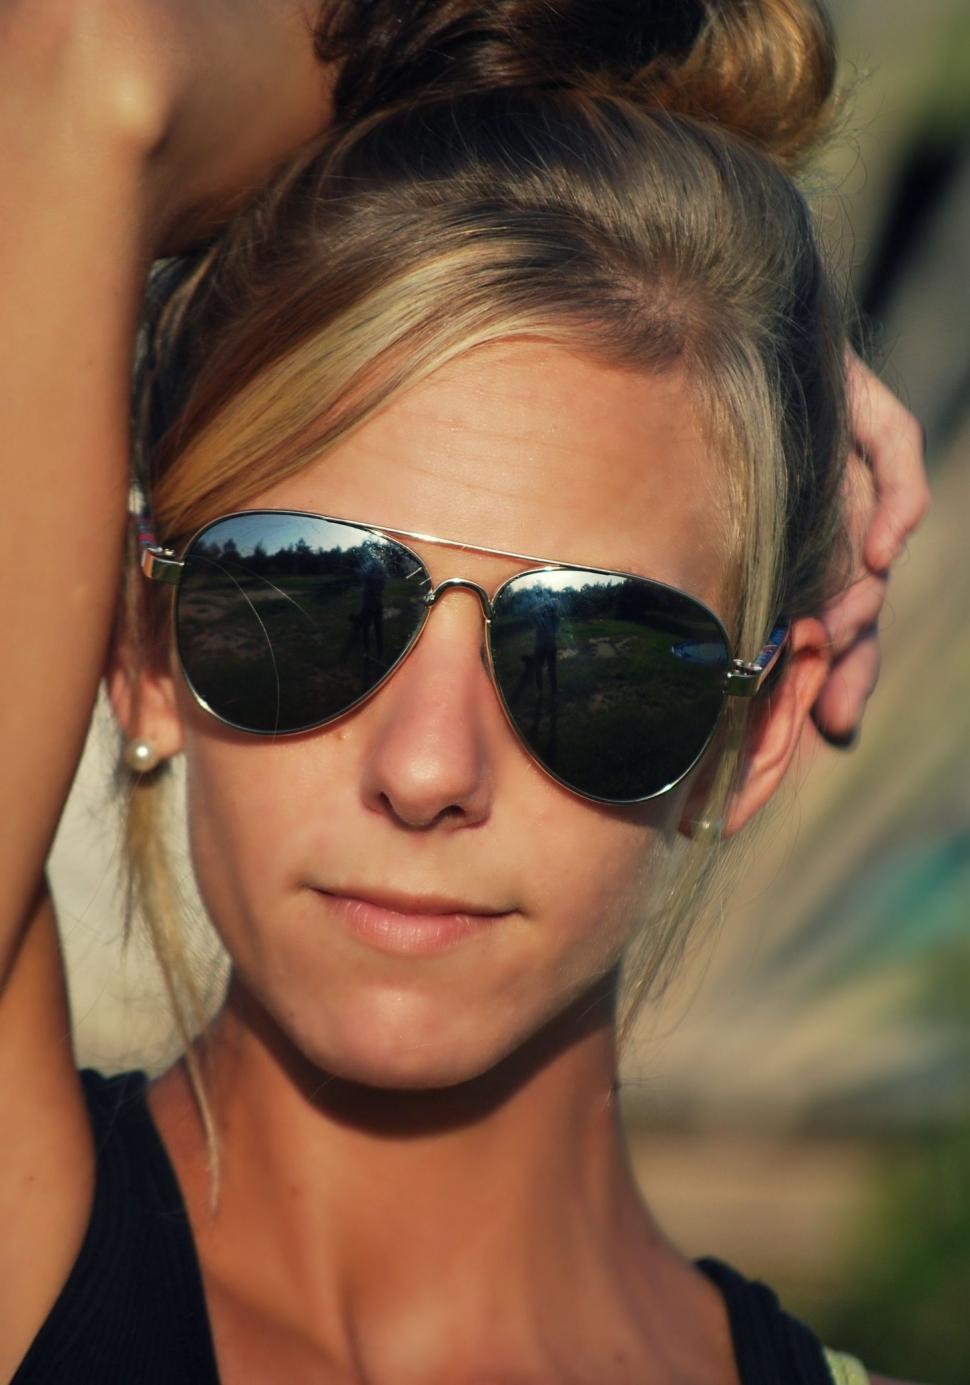 Free Image of Stylish Blonde Woman in Sunglasses  